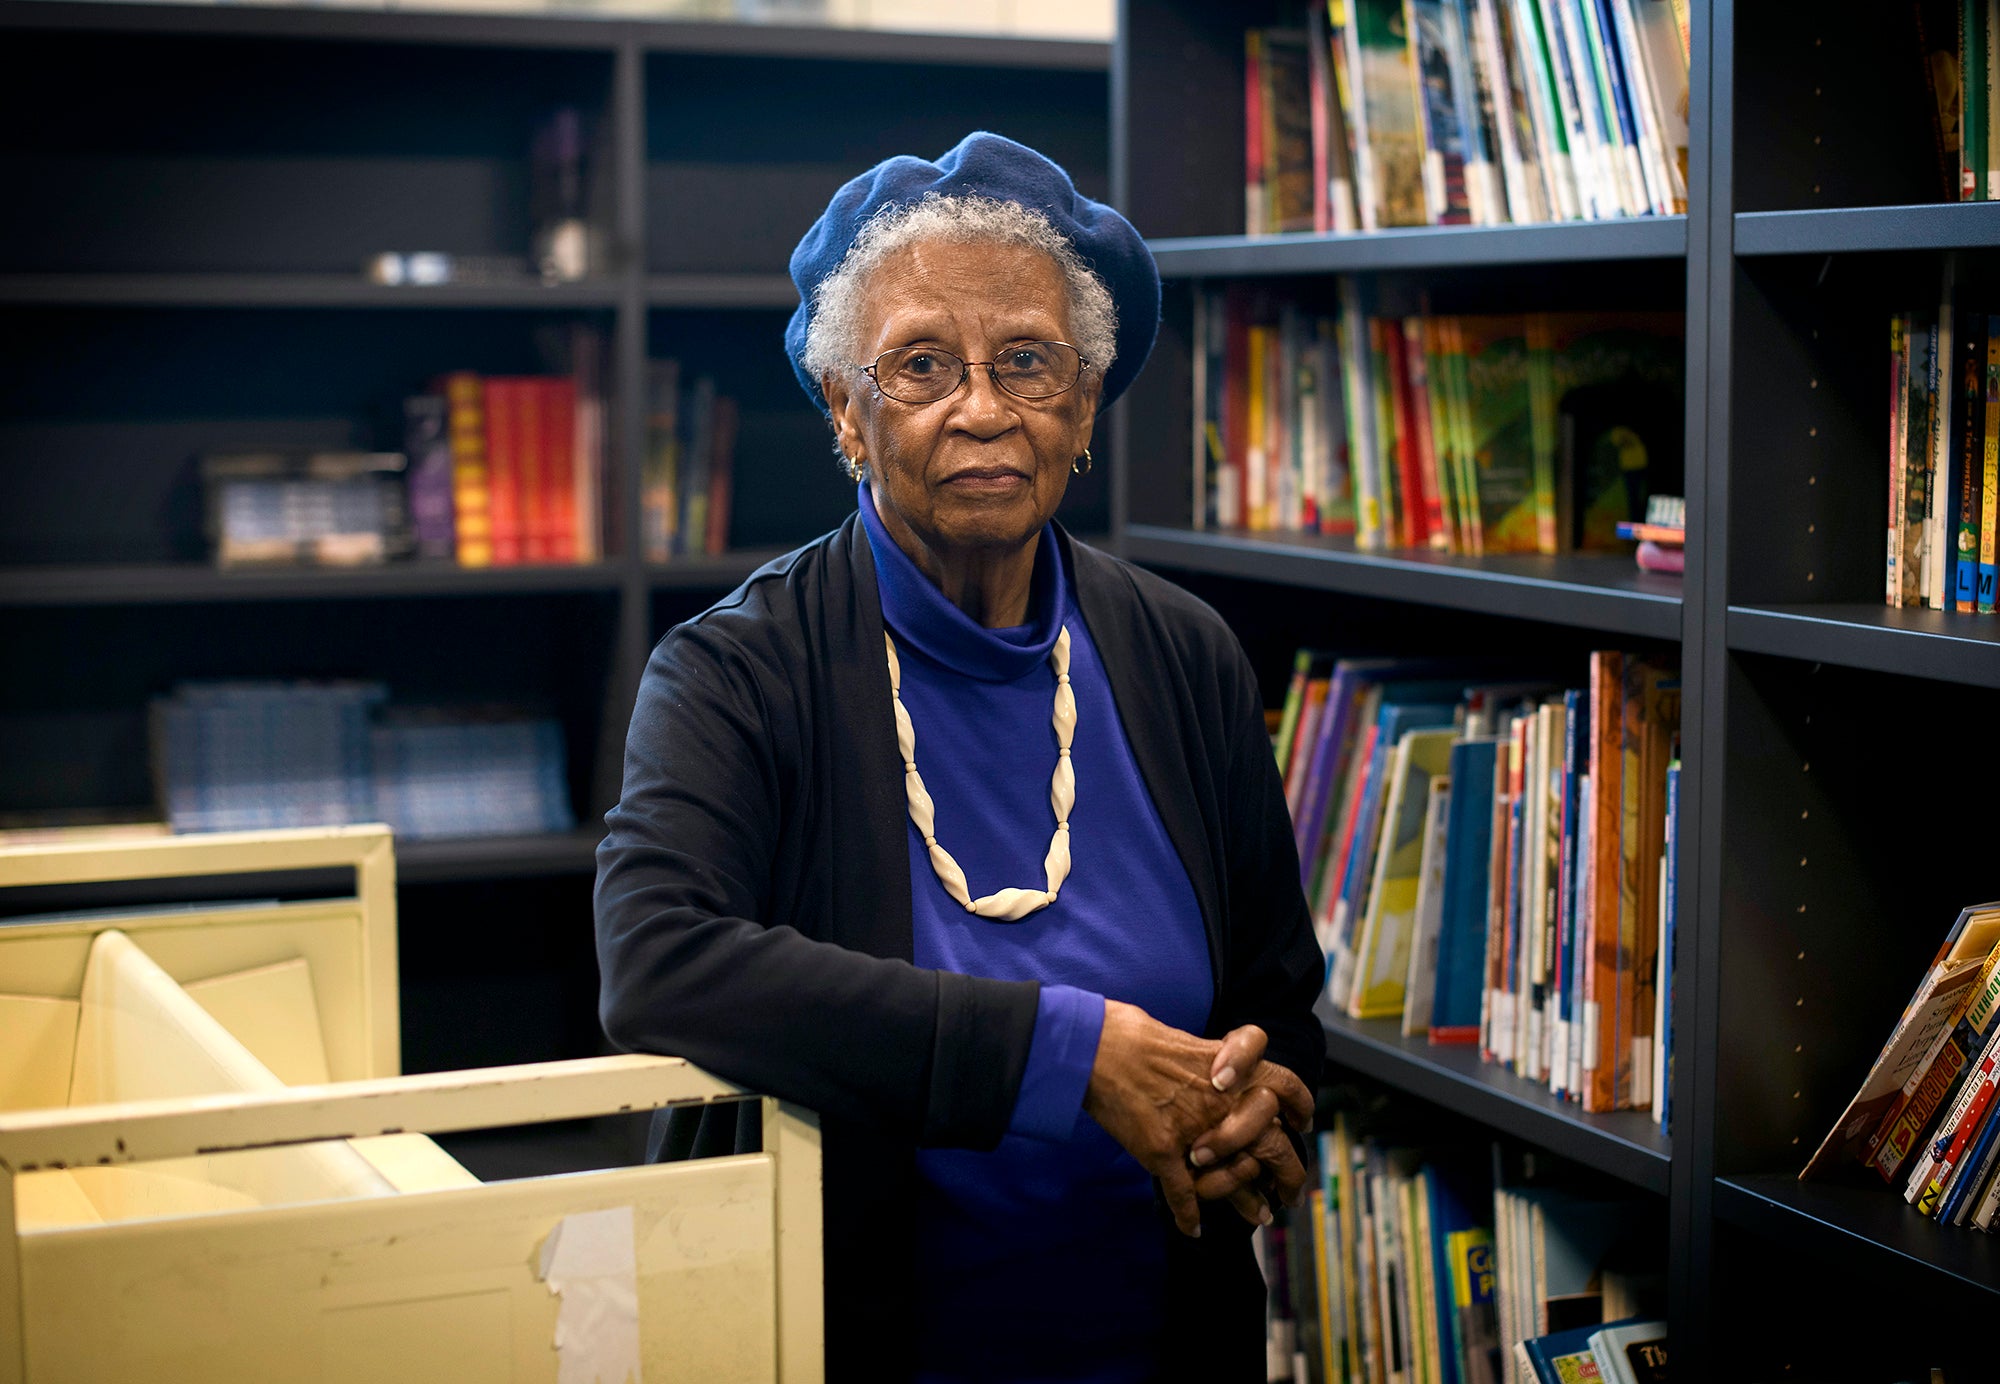 An older woman looking directly at the camera in a library.